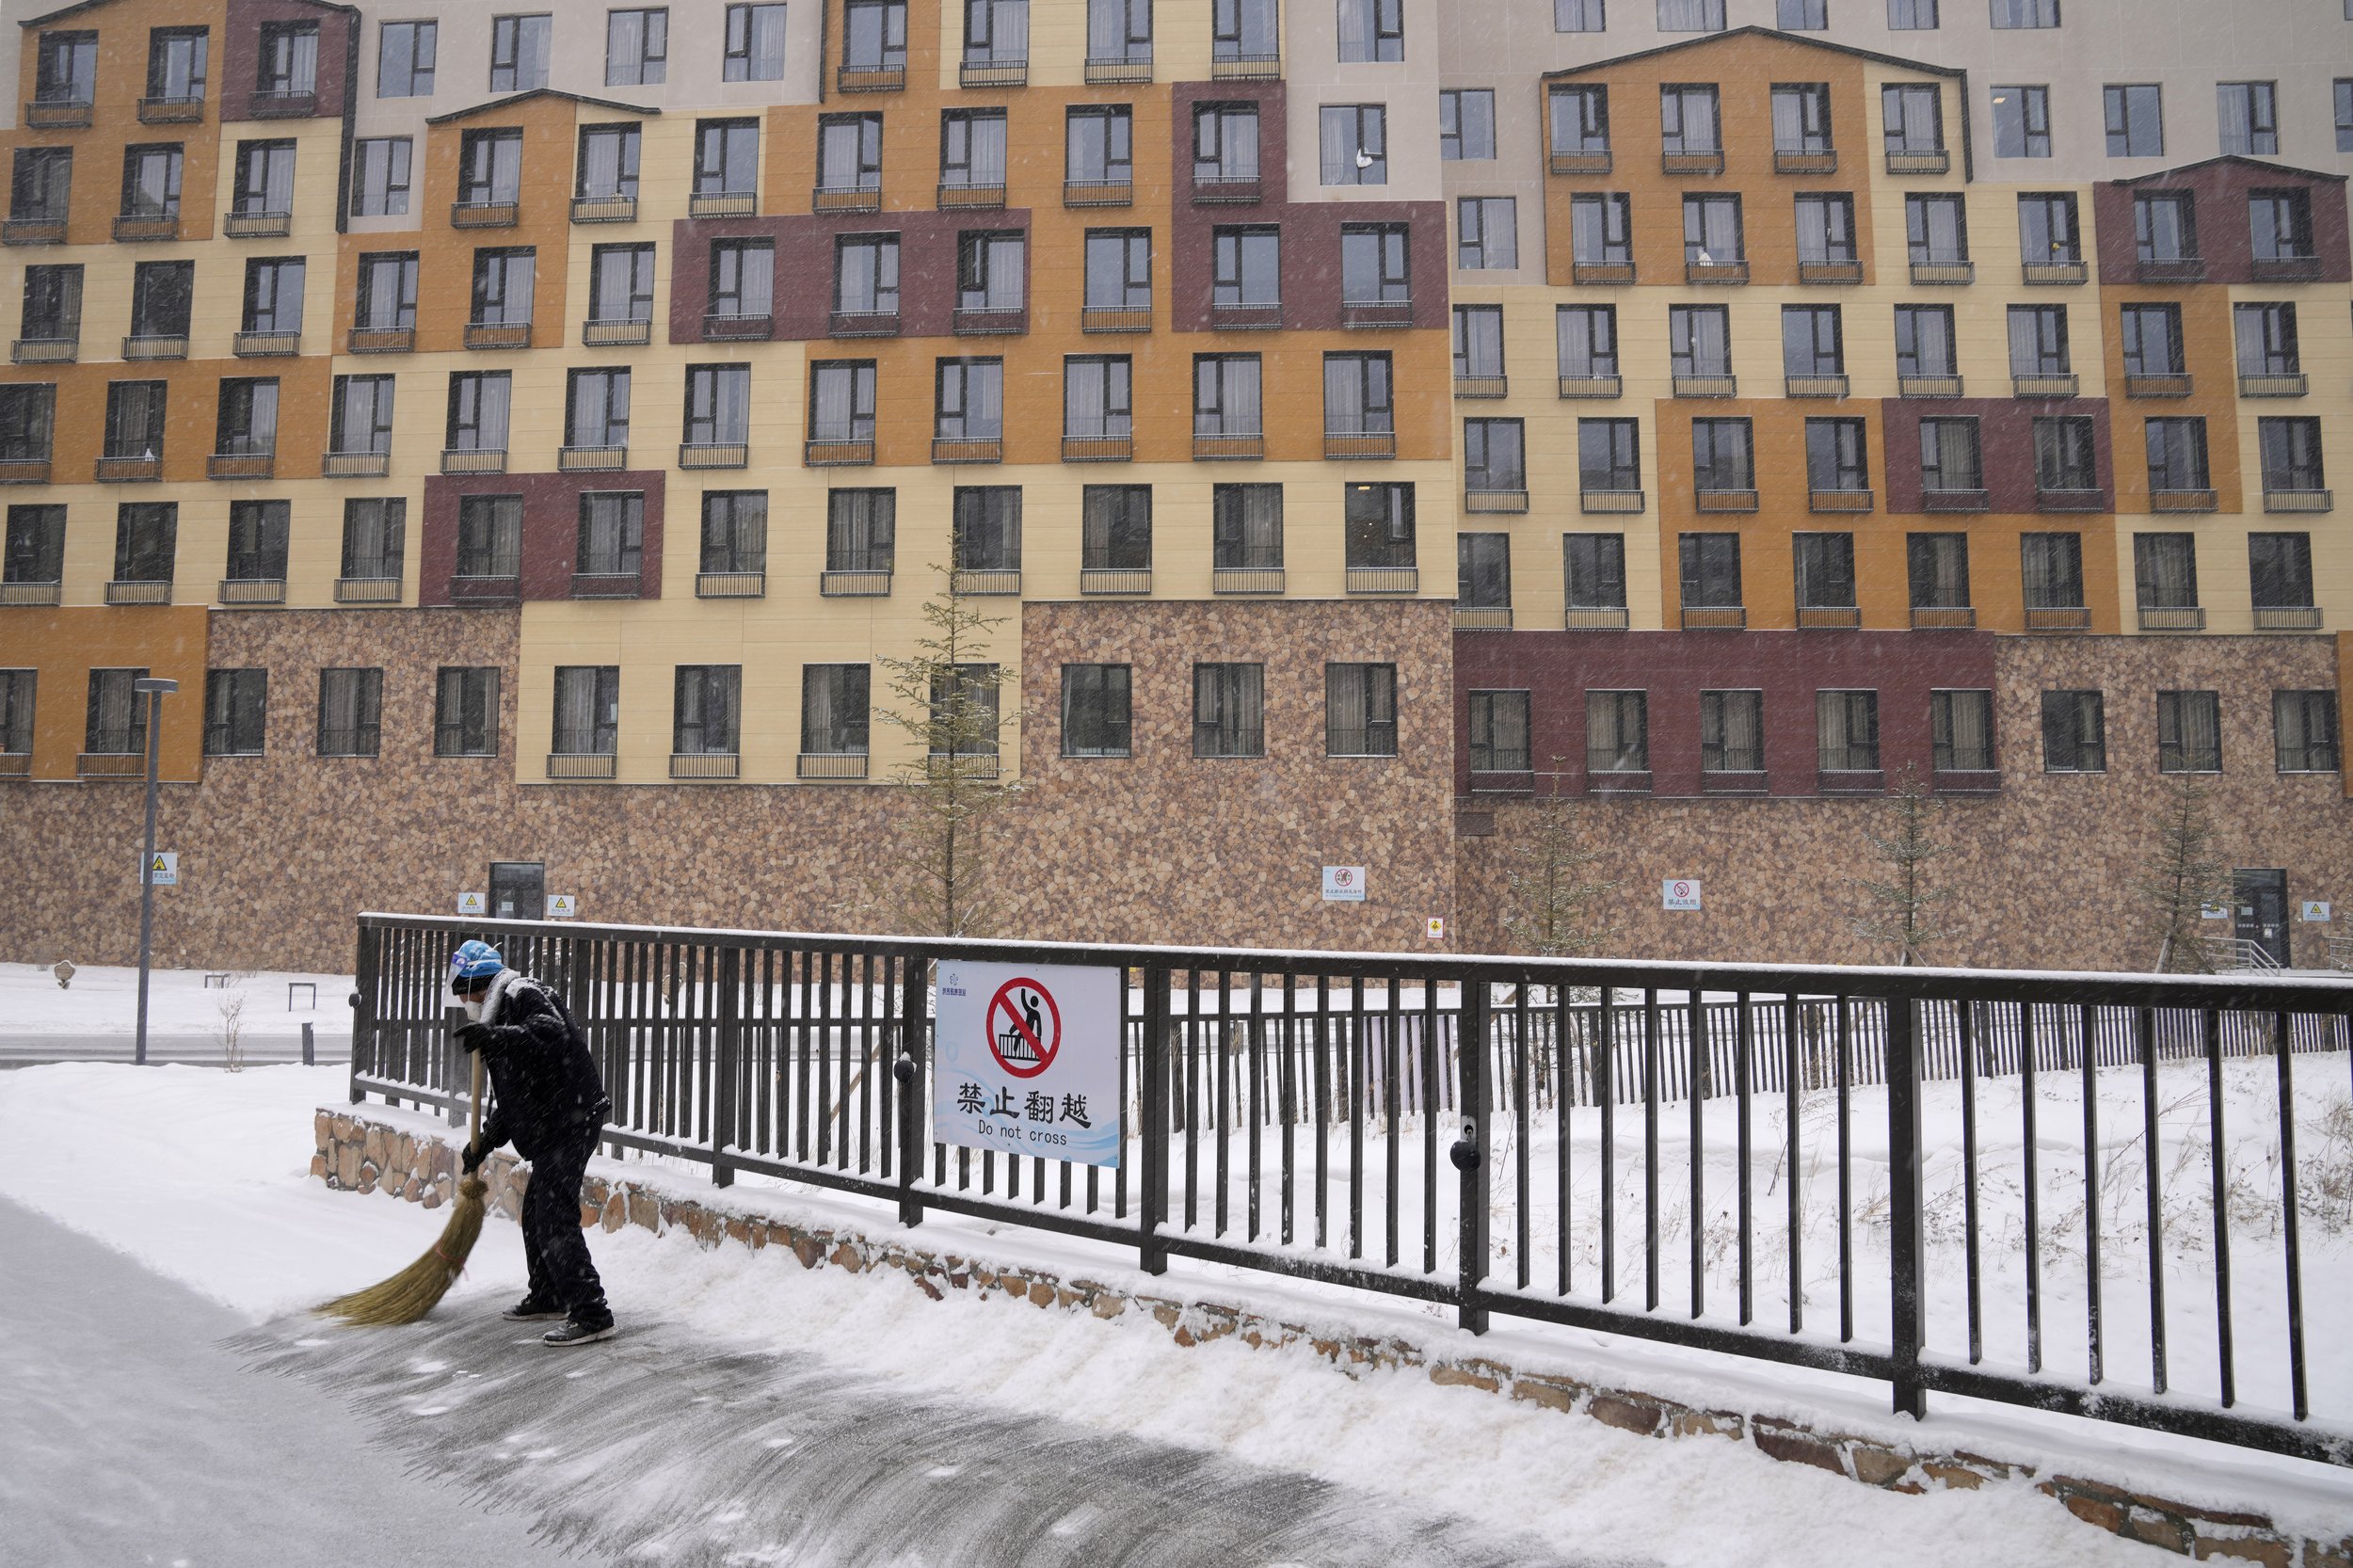  A worker sweeps away snow during a snowstorm at a hotel complex at the 2022 Winter Olympics, Sunday, Feb. 13, 2022, in Zhangjiakou, China. (AP Photo/Aaron Favila) 